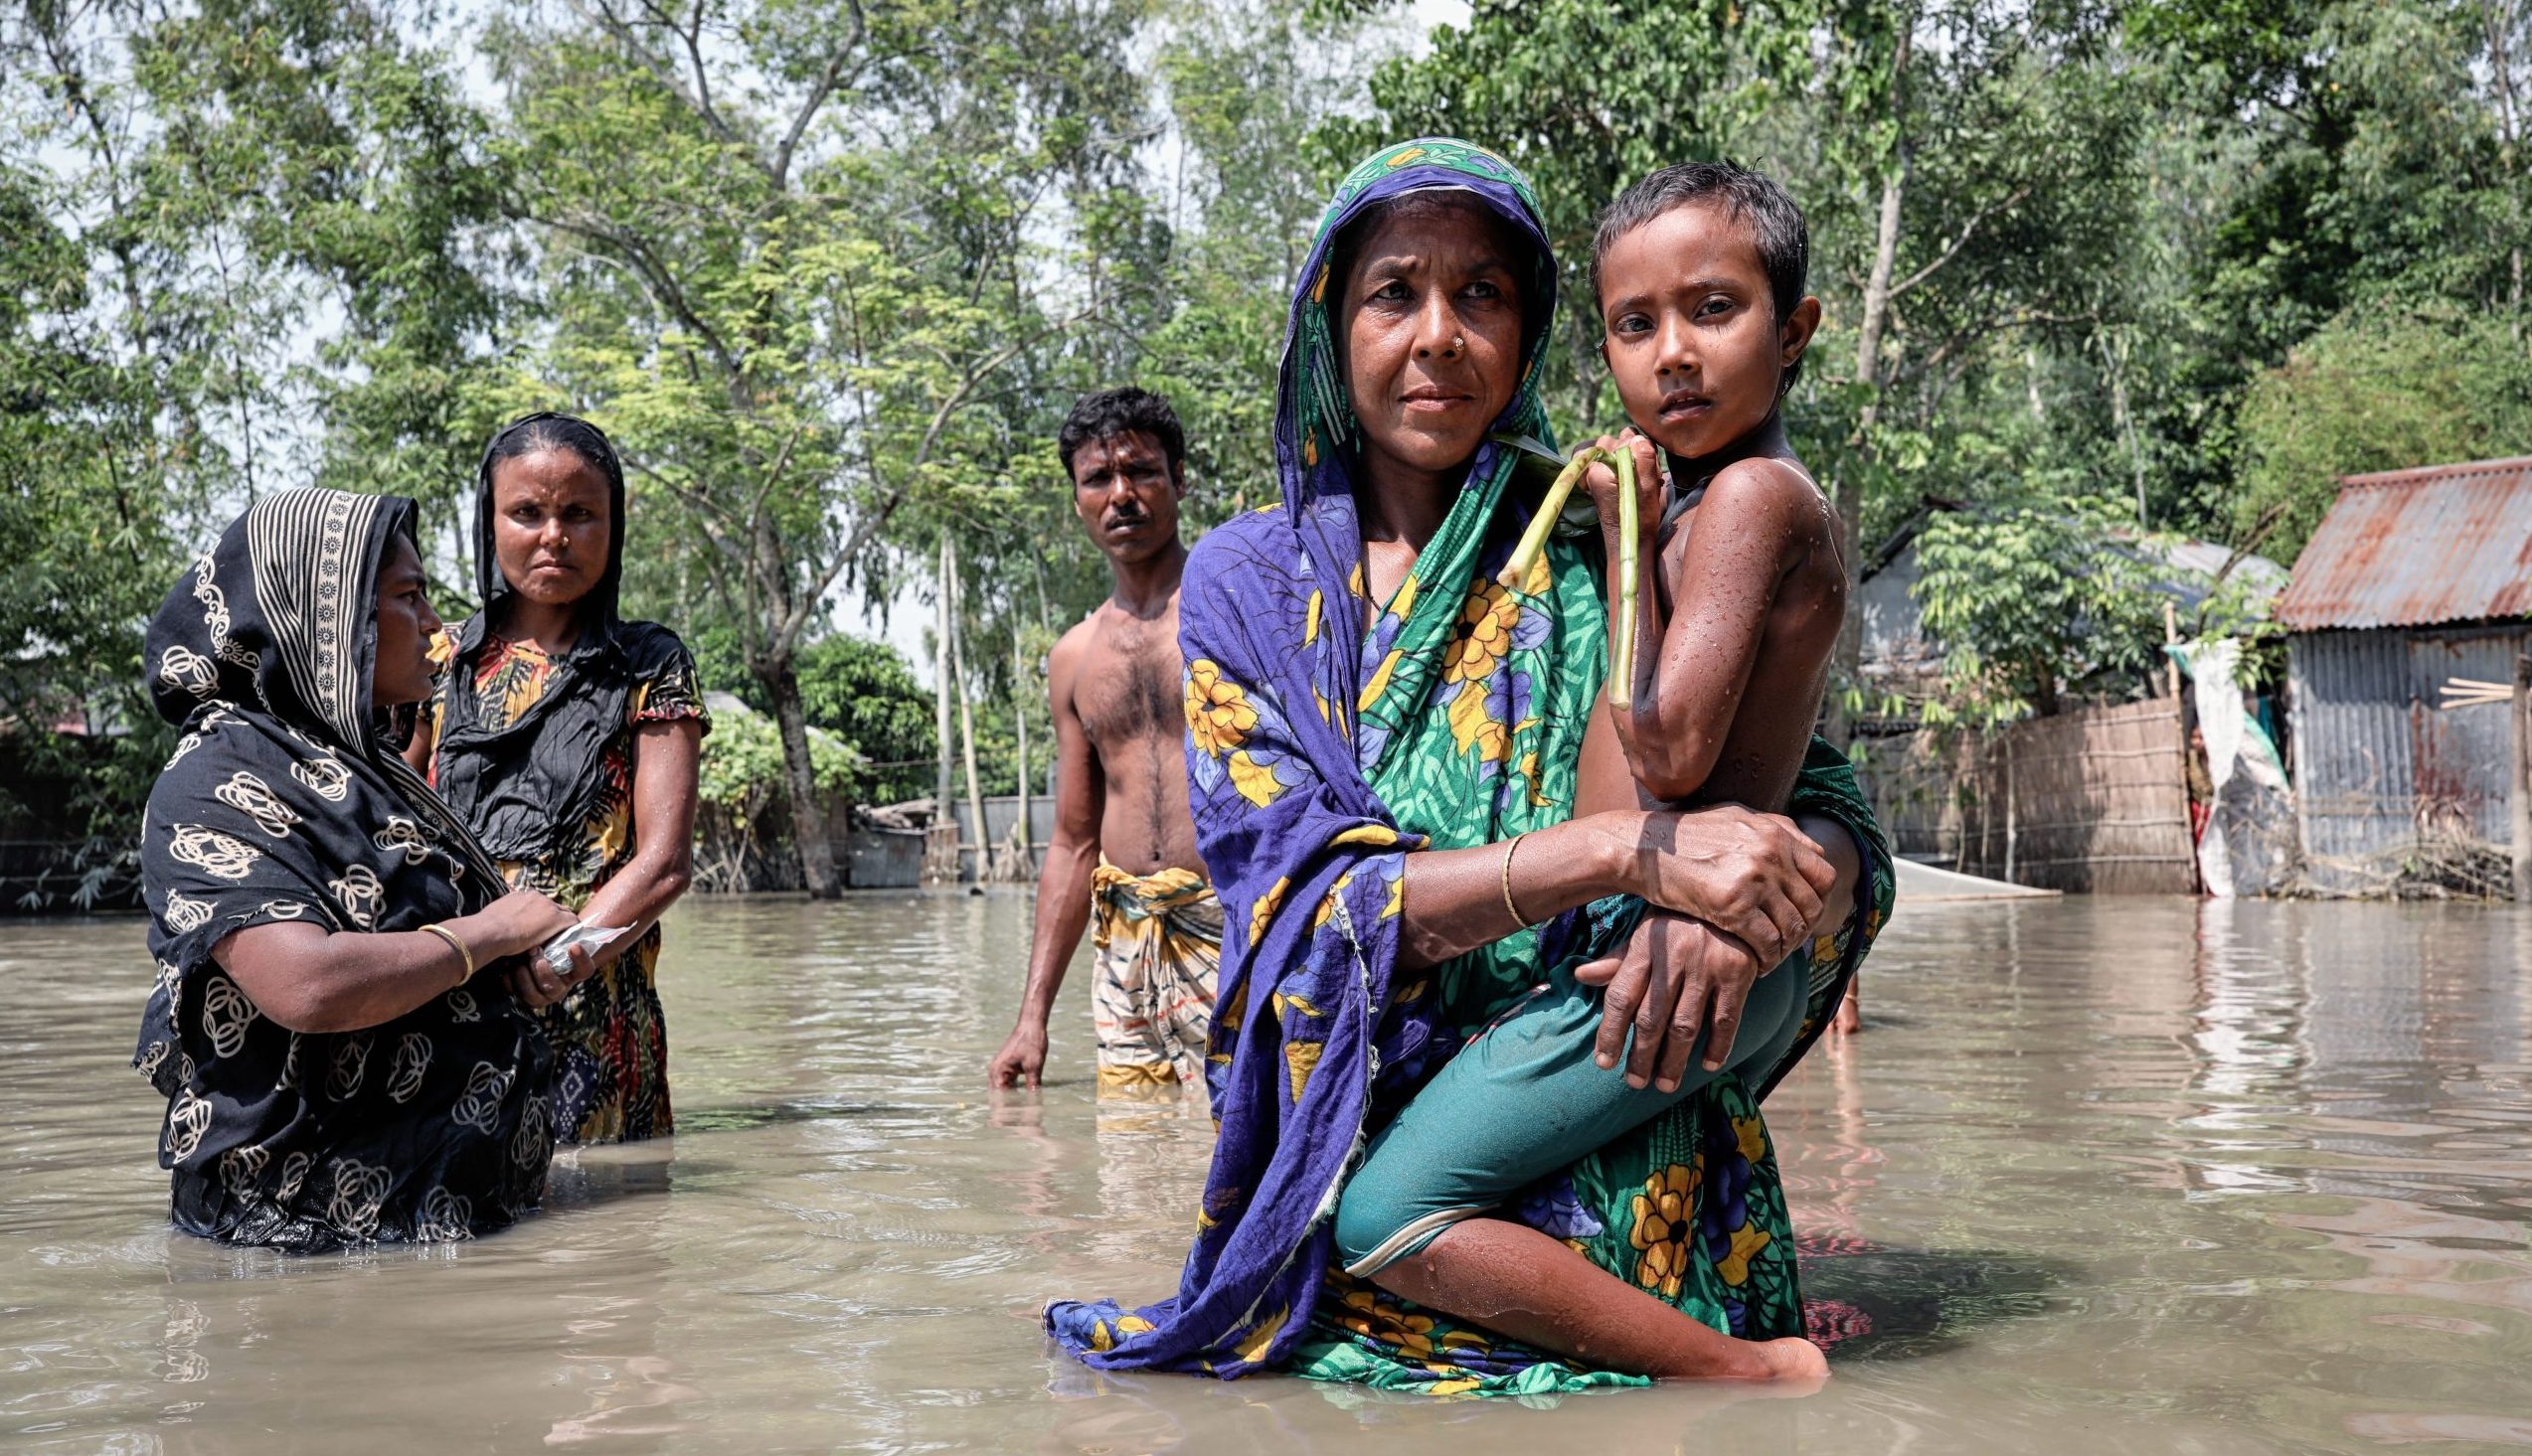 A Bangladeshi woman holds a child while standing in brown flood water. Behind are two women and a man.